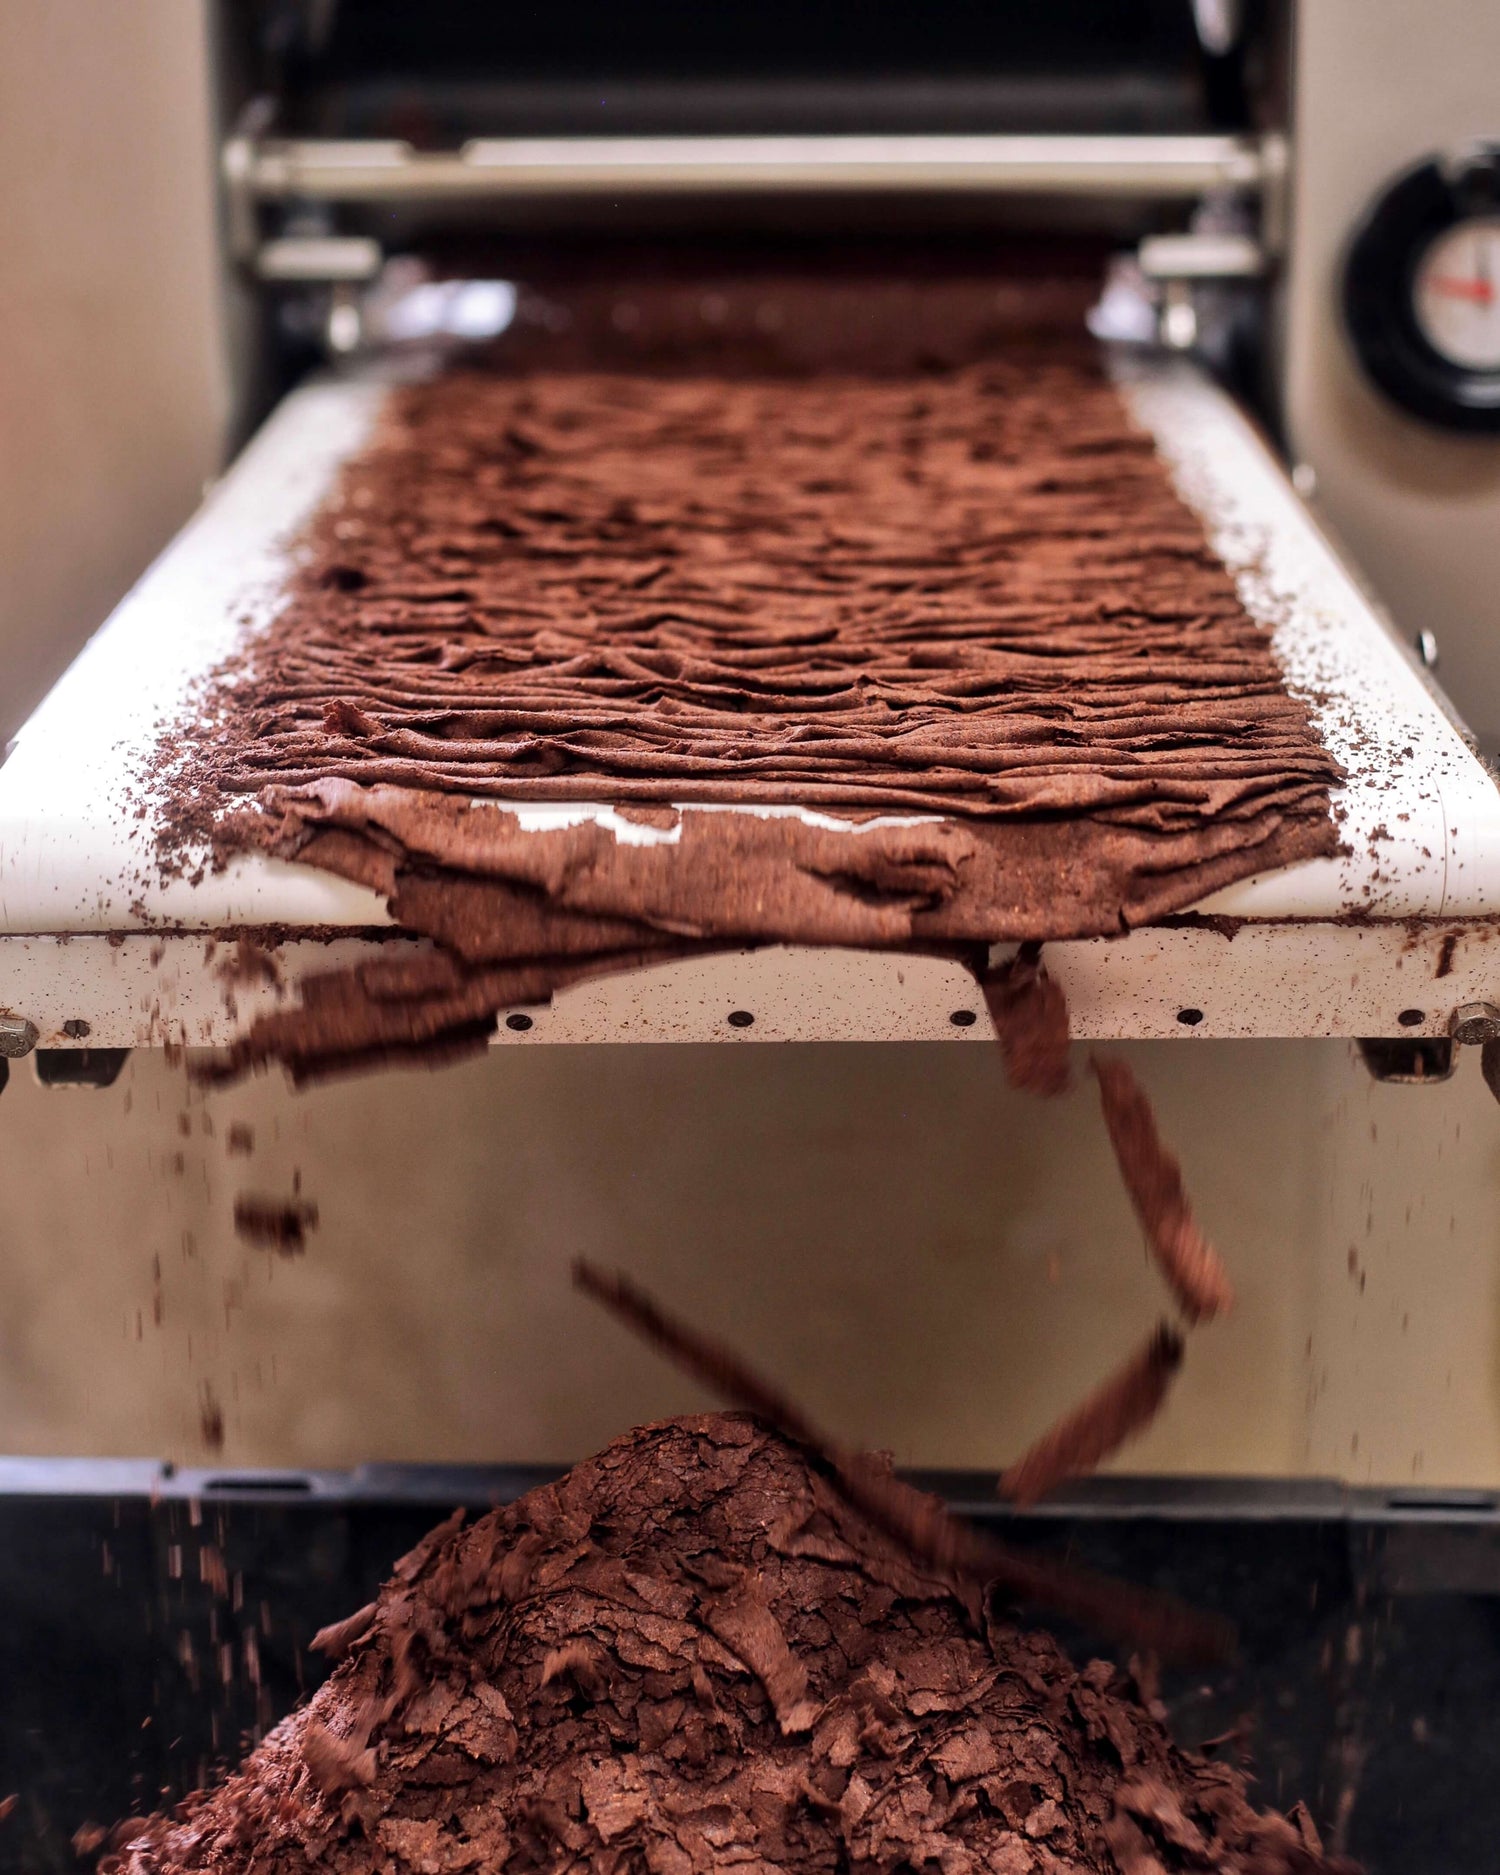 Image of machine crushing cacao nibs into a fine powder